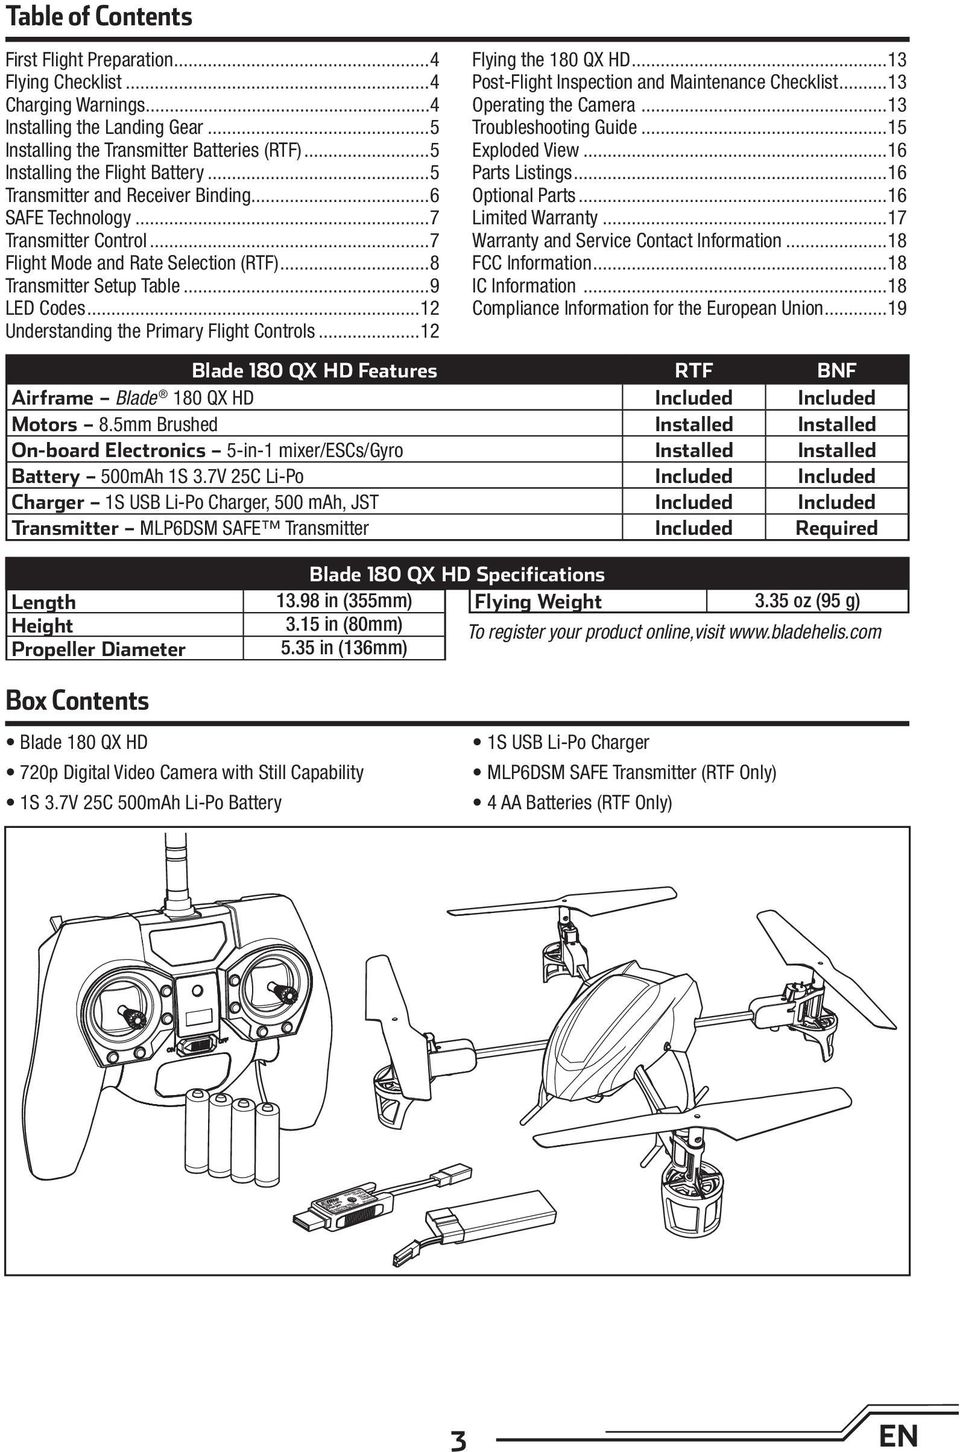 ..12 Understanding the Primary Flight Controls...12 Flying the 180 QX HD...13 Post-Flight Inspection and Maintenance Checklist...13 Operating the Camera...13 Troubleshooting Guide...15 Exploded View.